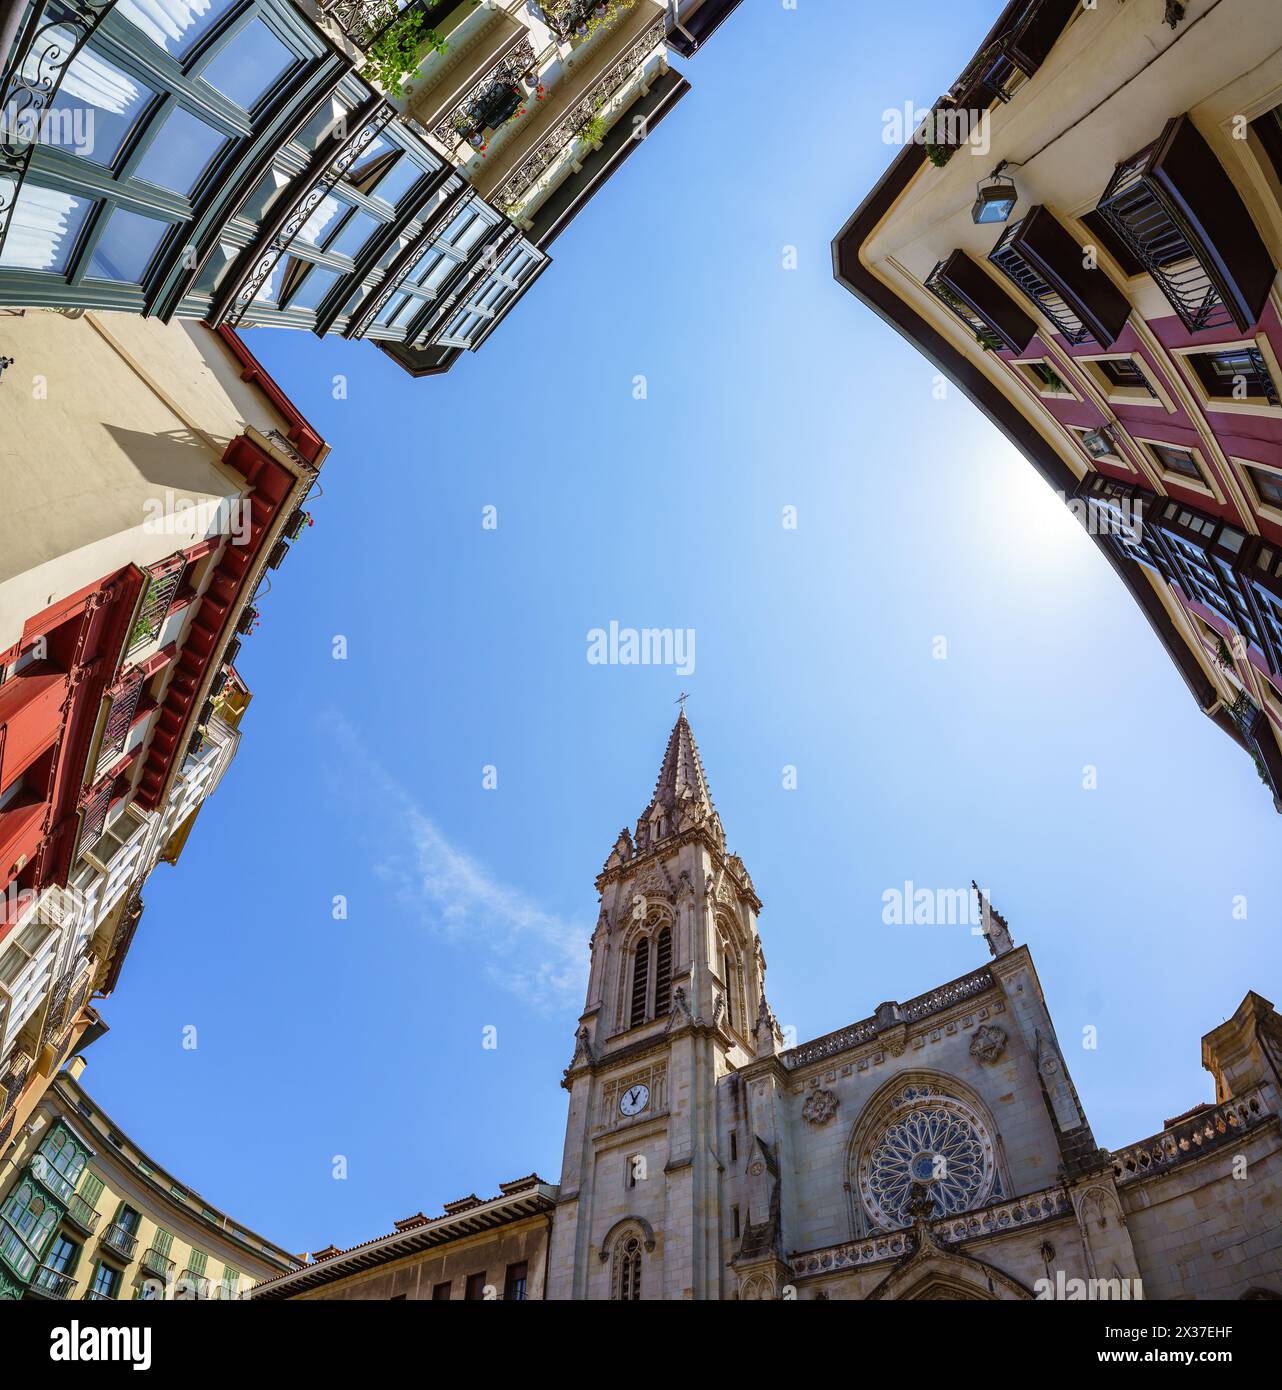 Upward View of an Ornate Cathedral Spire Against a Clear Blue Sky in Bilbao, Spain, a Historical European City Stock Photo